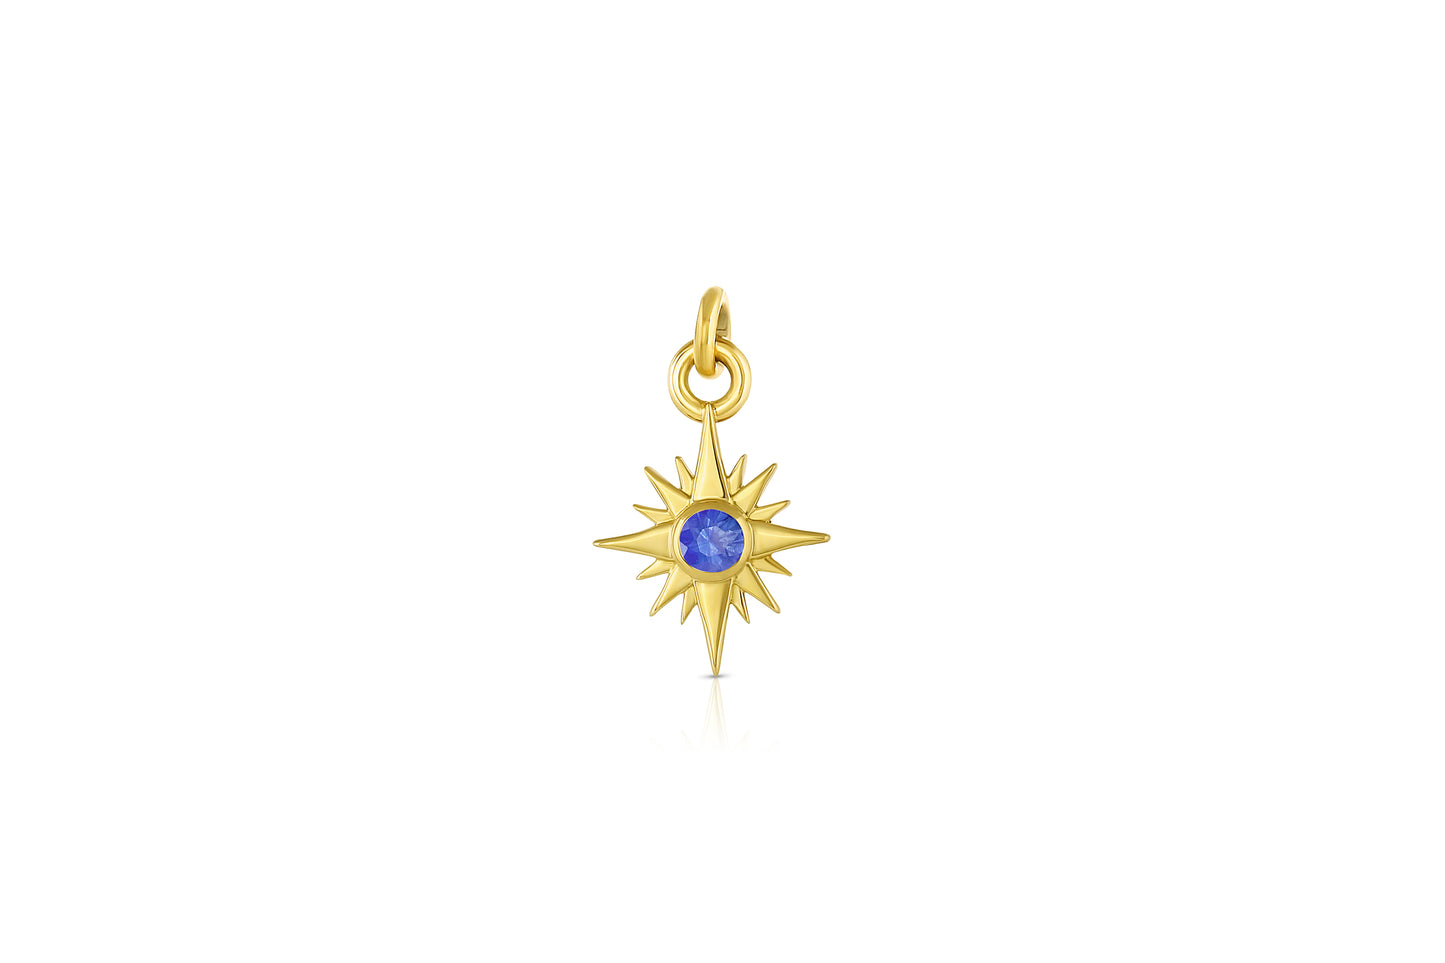 18k yellow gold star charm with blue sapphire center stone on white background.